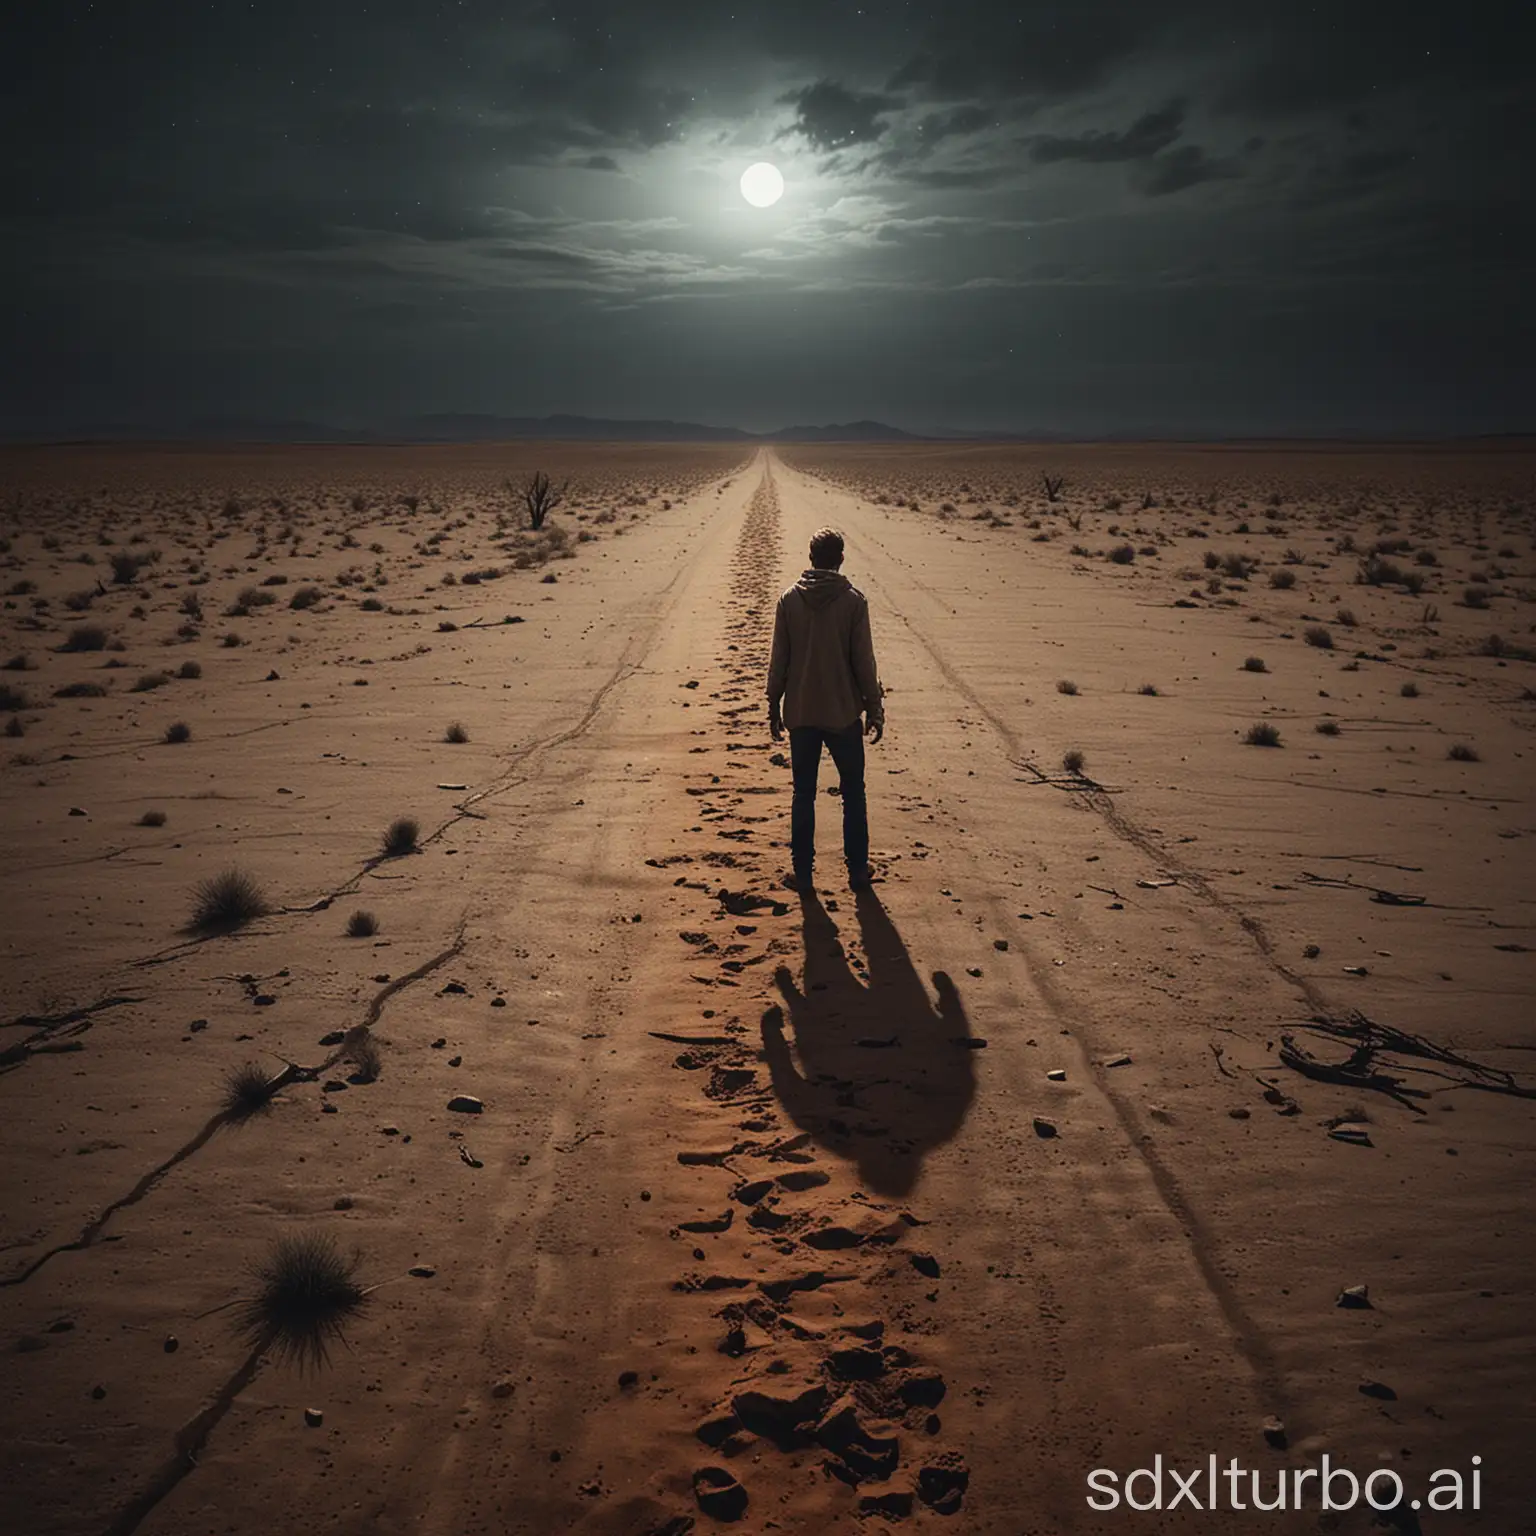 Create a high resolution, scary image about 'true middle of nowhere horror stories'? The image must be photorealistic, show a man alone in the middle of a dry desert shot from far away, man in the middle of nowhere shot from far away, picture taken from far away, alone, in the middle of nowhere, dry desert, sketchy, atmospheric, catchy, night time, night lights, vibrant colors, must pop and catch attention. No horror, no gore, no monsters, the image must be photorealistic.